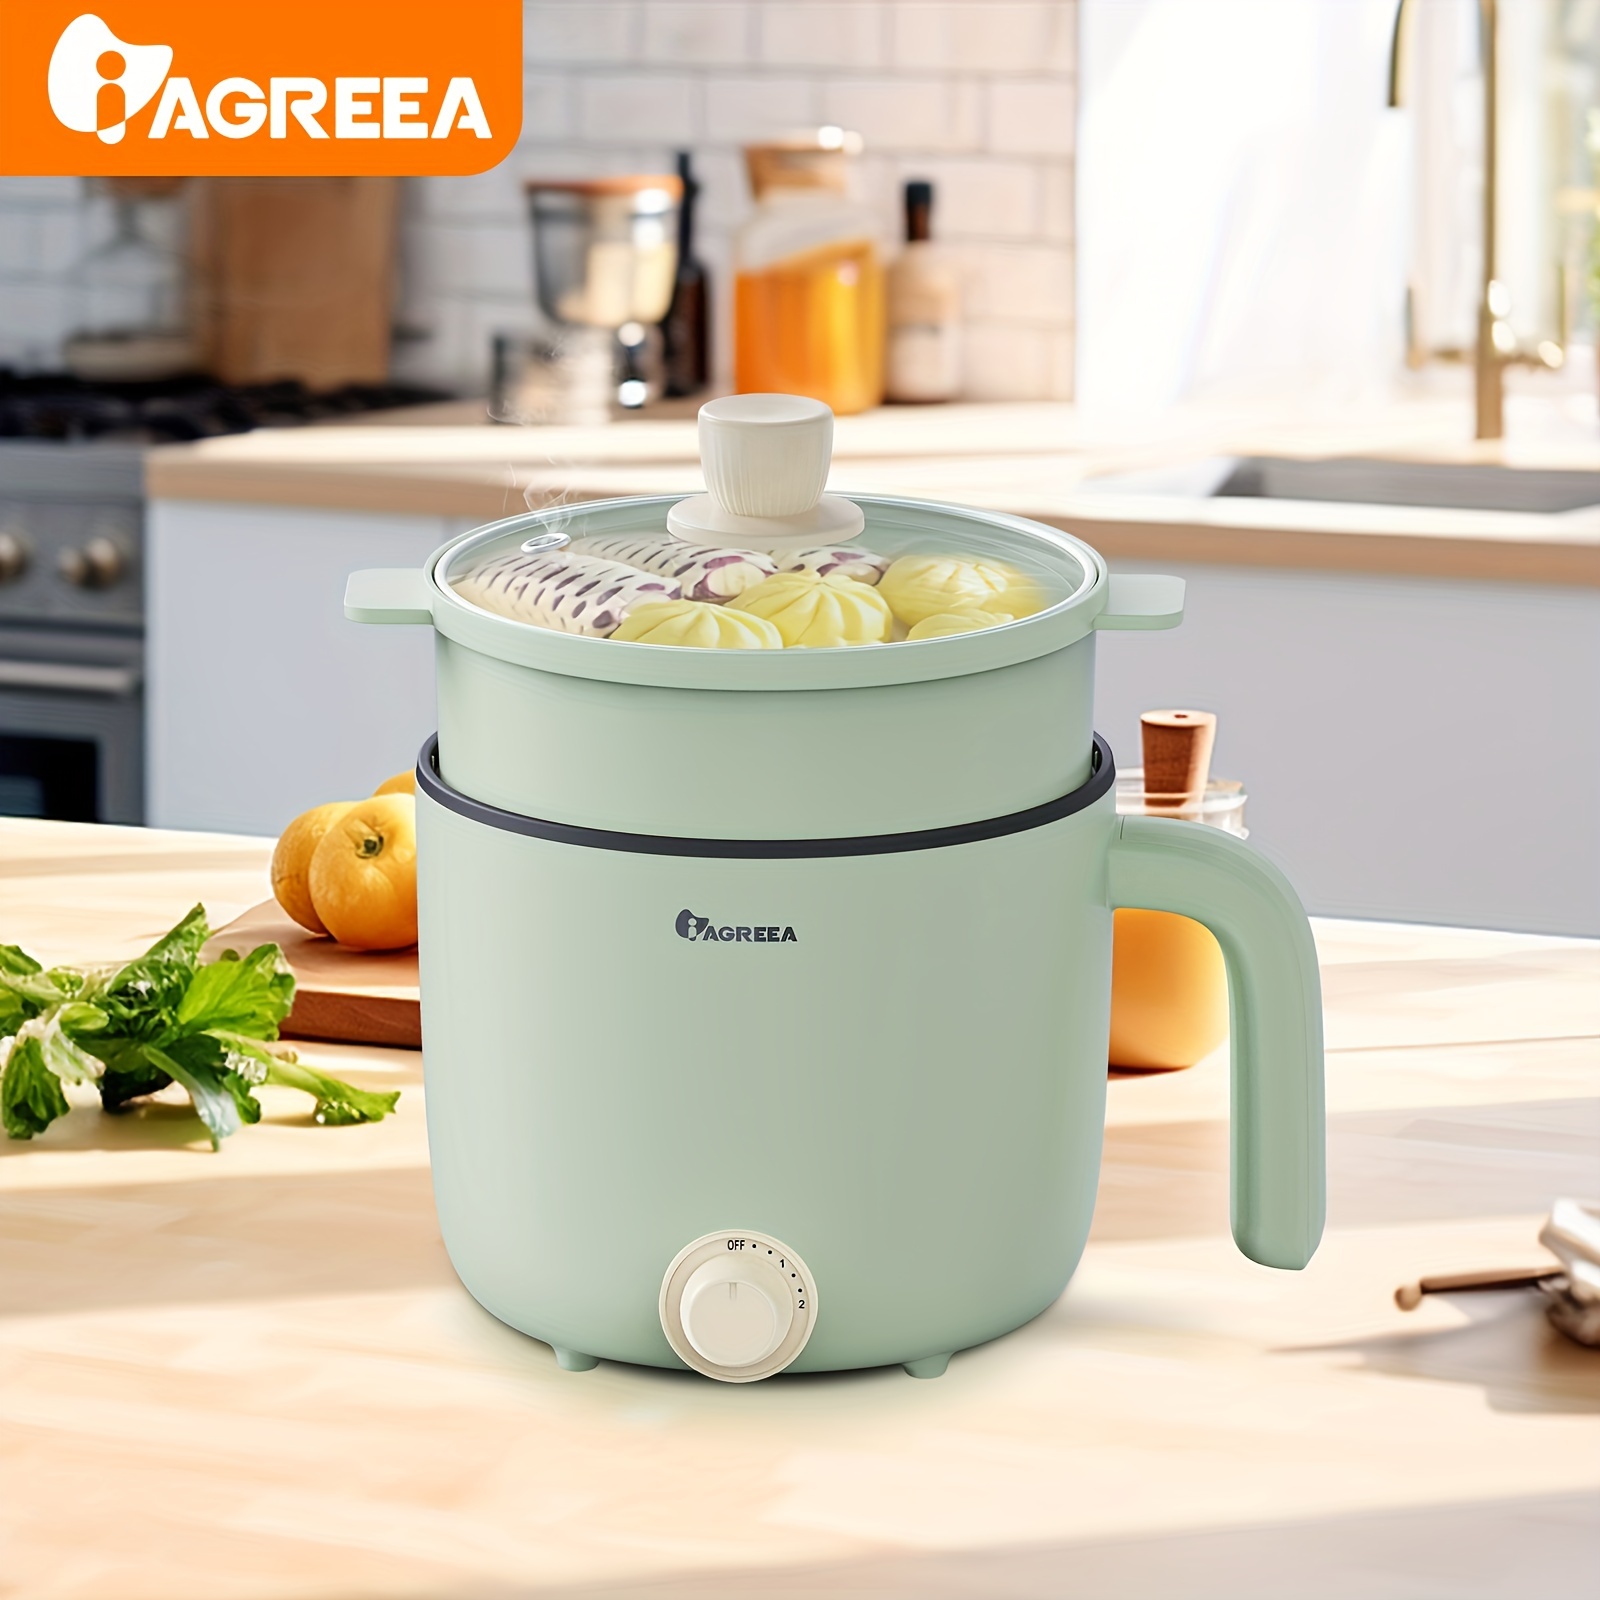  Bear Rice Cooker 2-Cups Uncooked, 1.2L Small Rice Cooker with  Non-stick Coating, BPA Free, Portable Mini Rice Cooker, One Button to Cook  and Keep Warm Function, White: Home & Kitchen